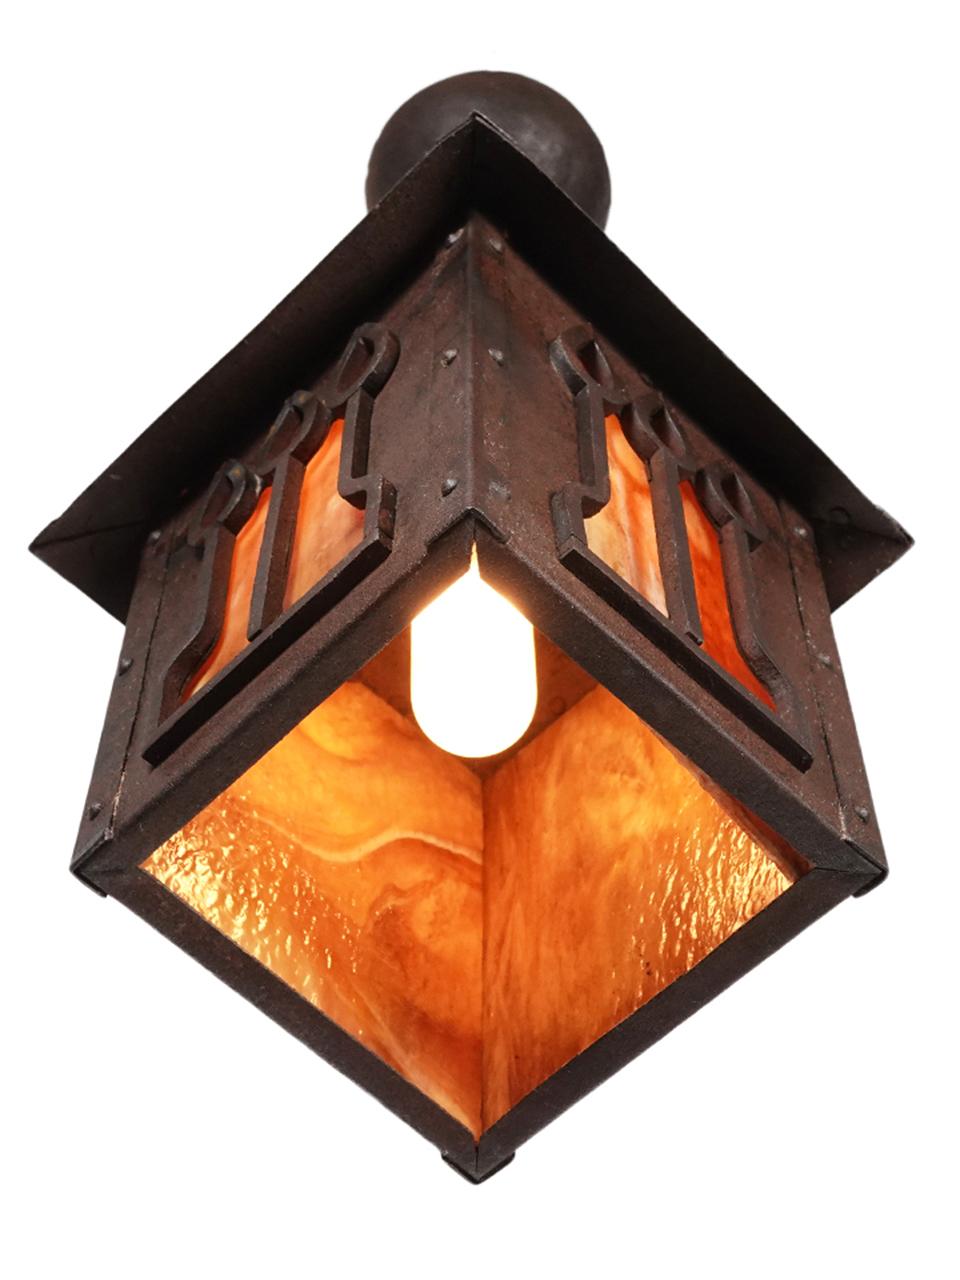 This is a very high style and earl Arts & Crafts Lantern. The metal is iron and handmade. The glass is a variegated amber glass. Its unsigned but could be an important maker.